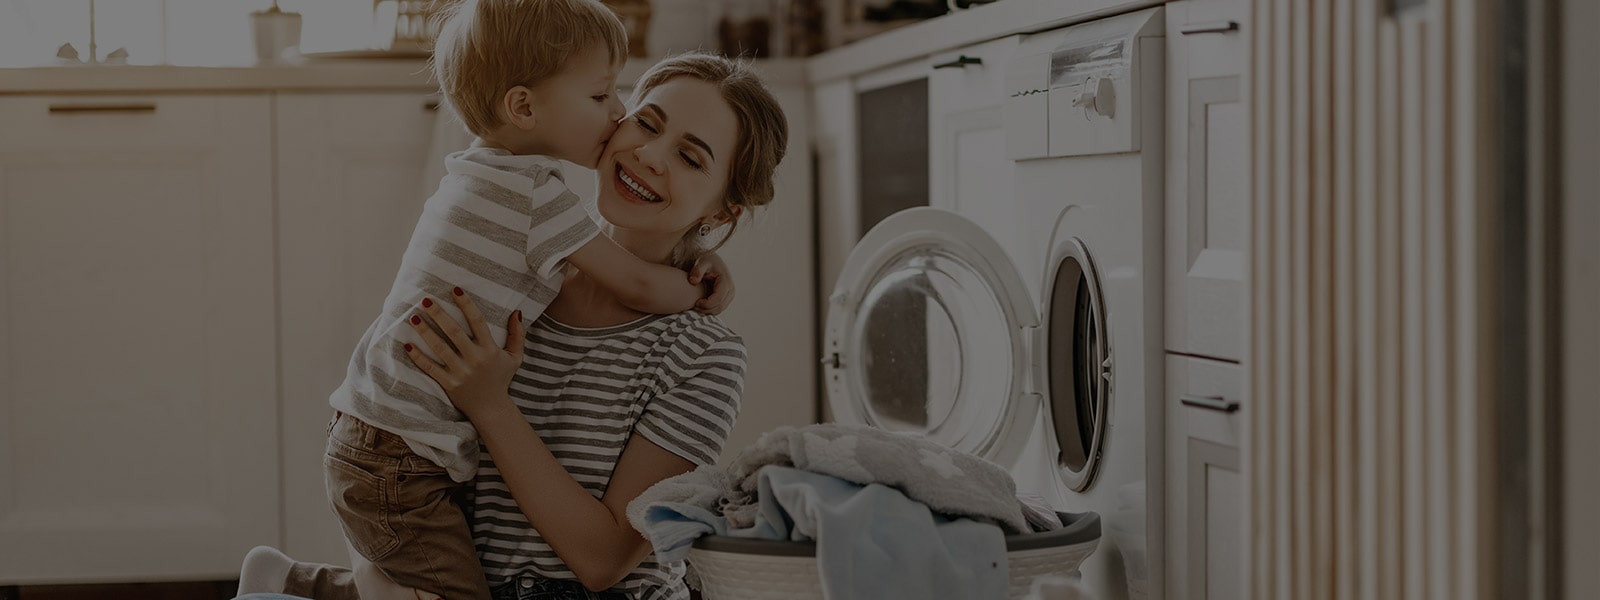 It's an image of a mother and a baby sitting in front of a washing machine.